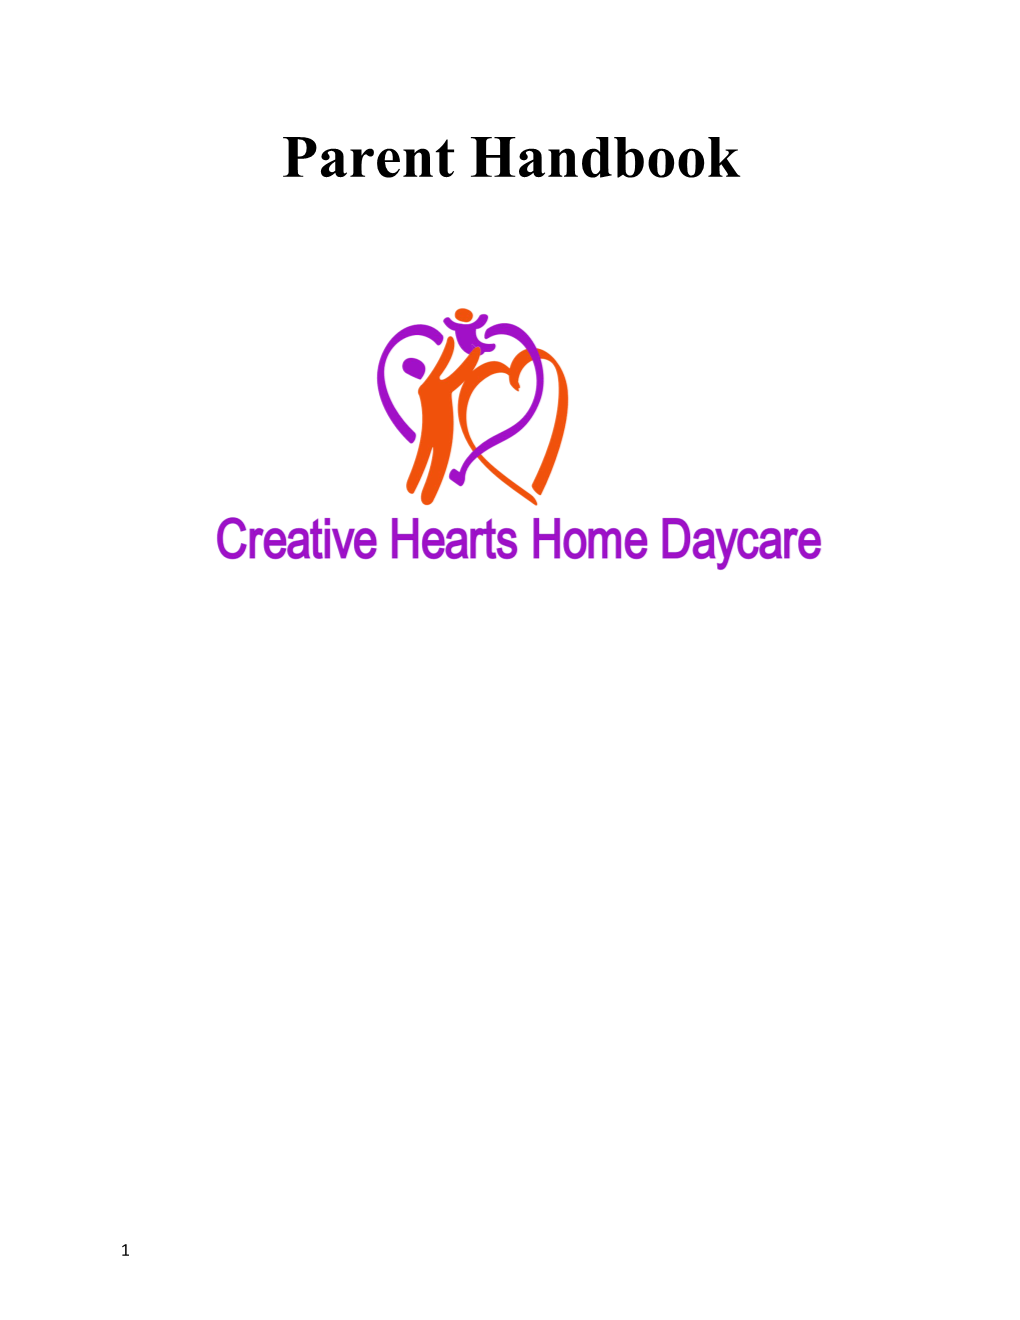 Welcome to Creative Hearts Home Daycare